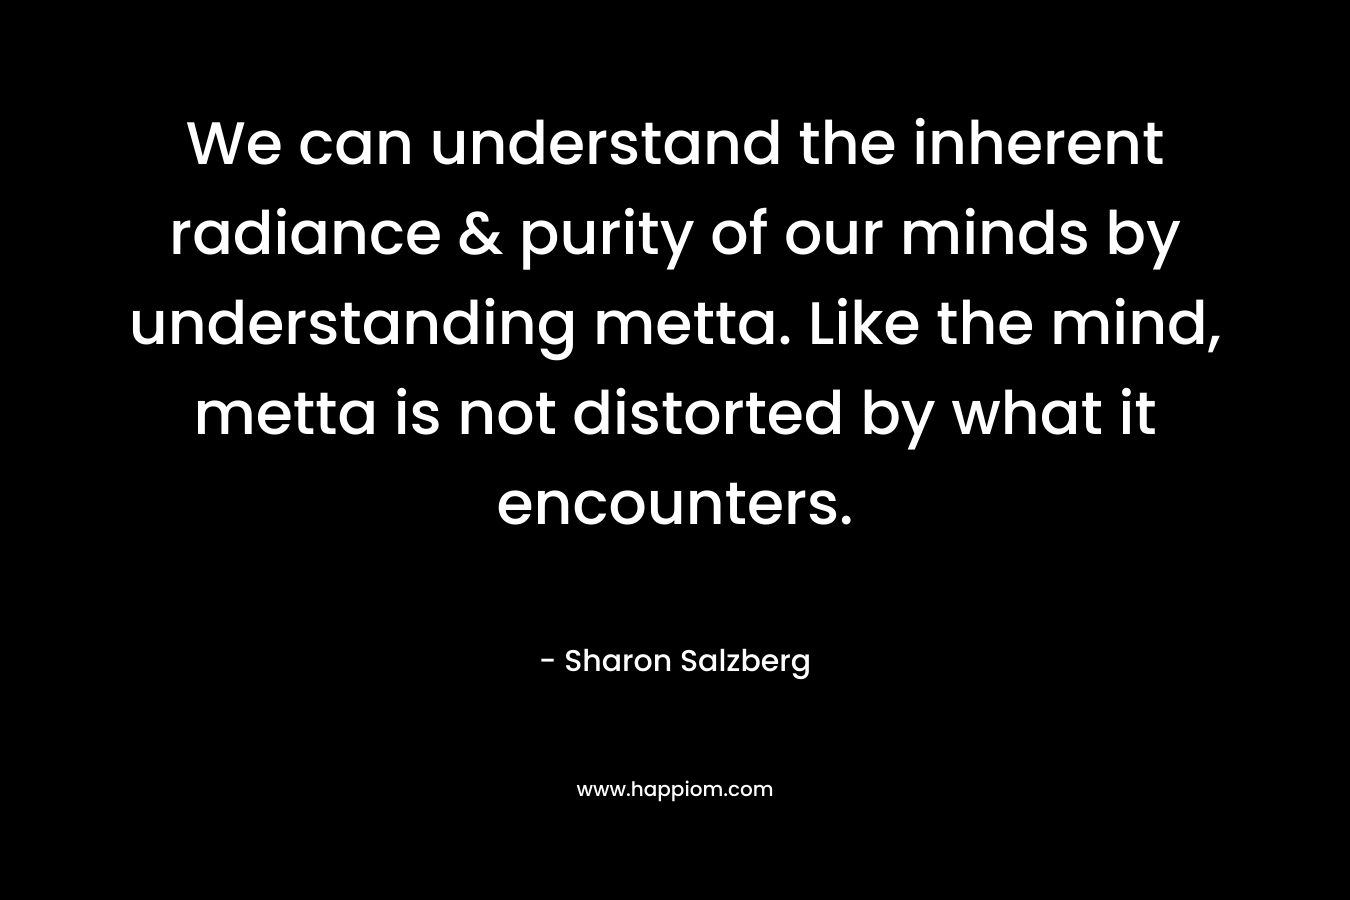 We can understand the inherent radiance & purity of our minds by understanding metta. Like the mind, metta is not distorted by what it encounters.